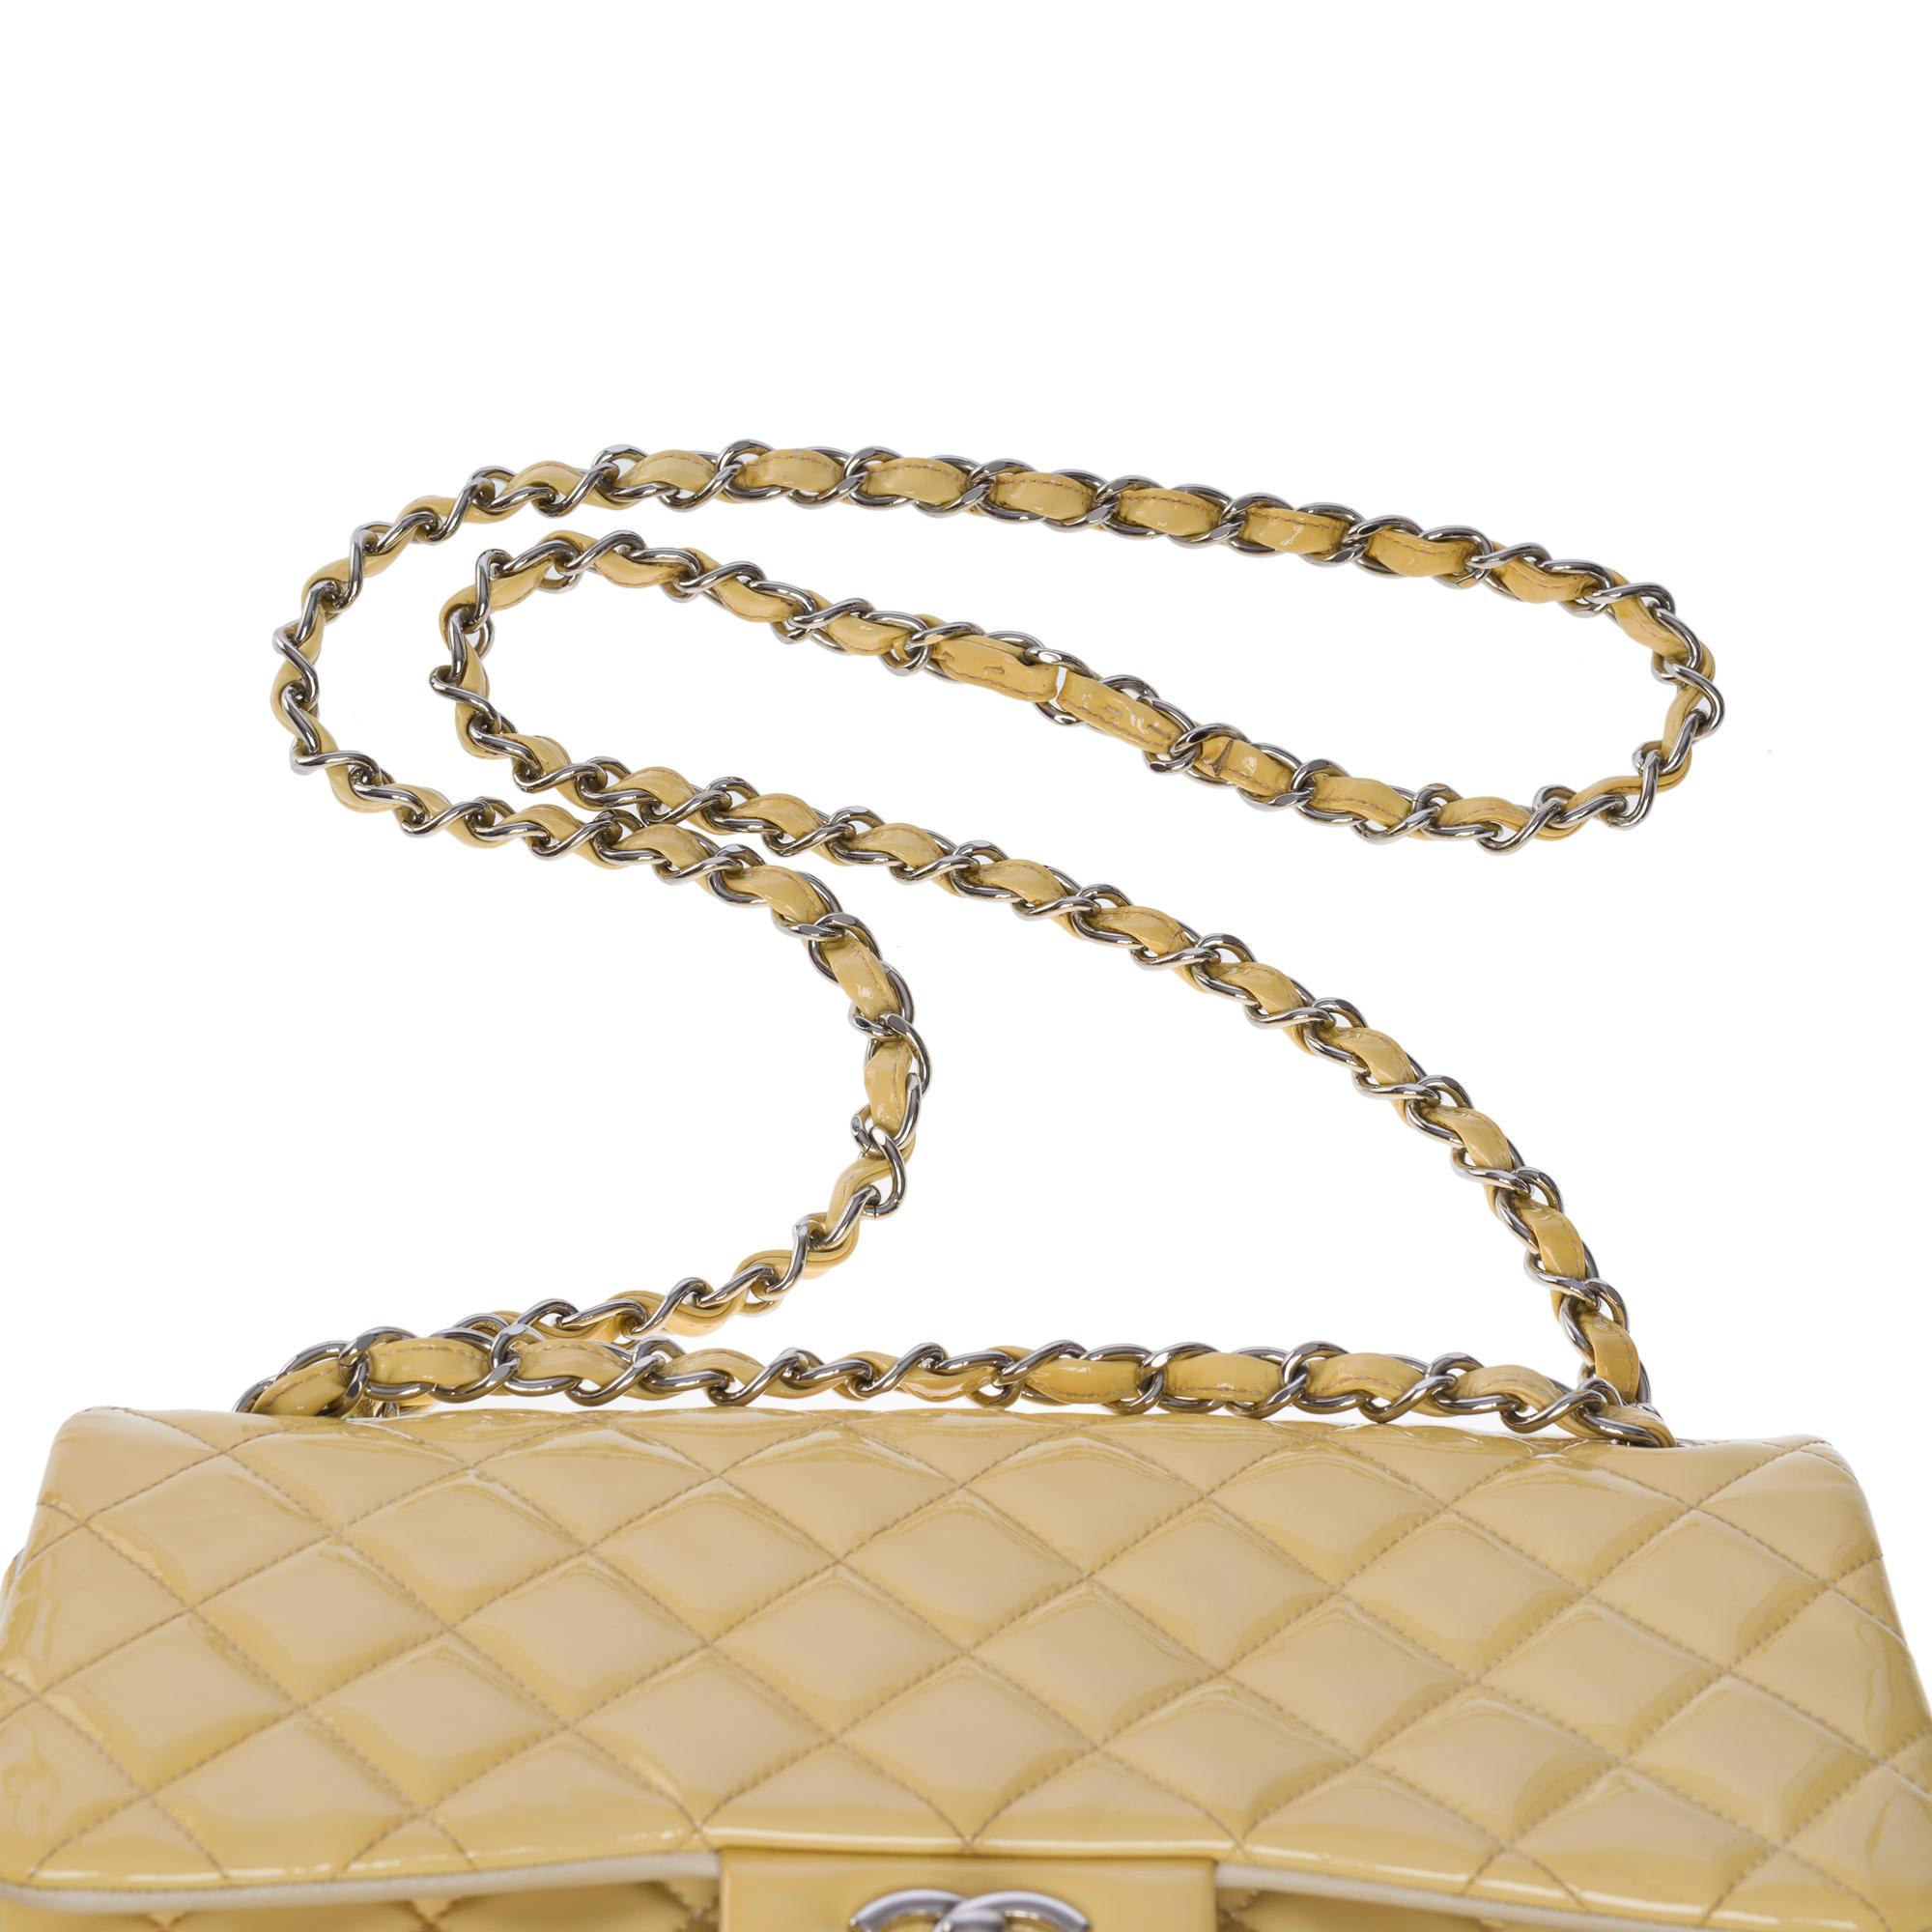 Chanel Timeless Jumbo double flap shoulder bag in yellow patent leather, SHW 4